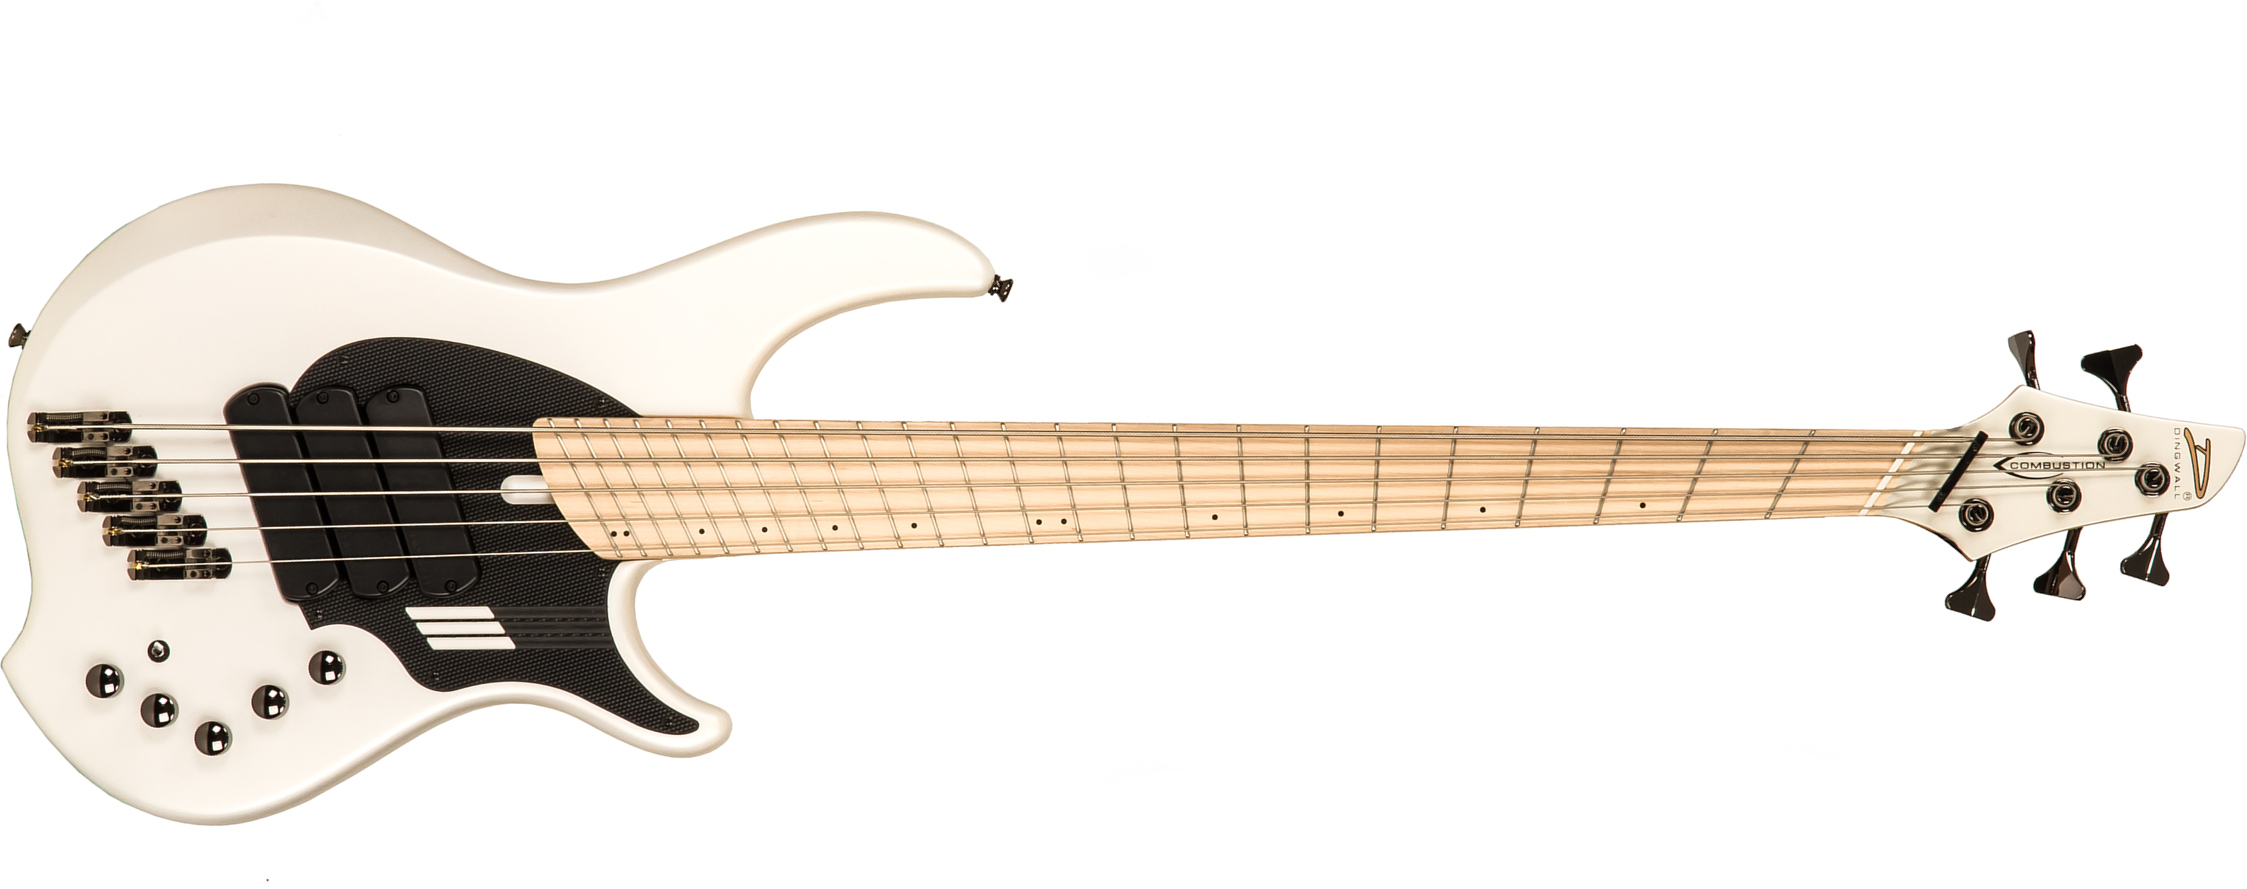 Dingwall Adam Nolly Getgood Ng3 5c Signature 3pu Active Mn - Ducati Pearl White - Solidbody E-bass - Main picture